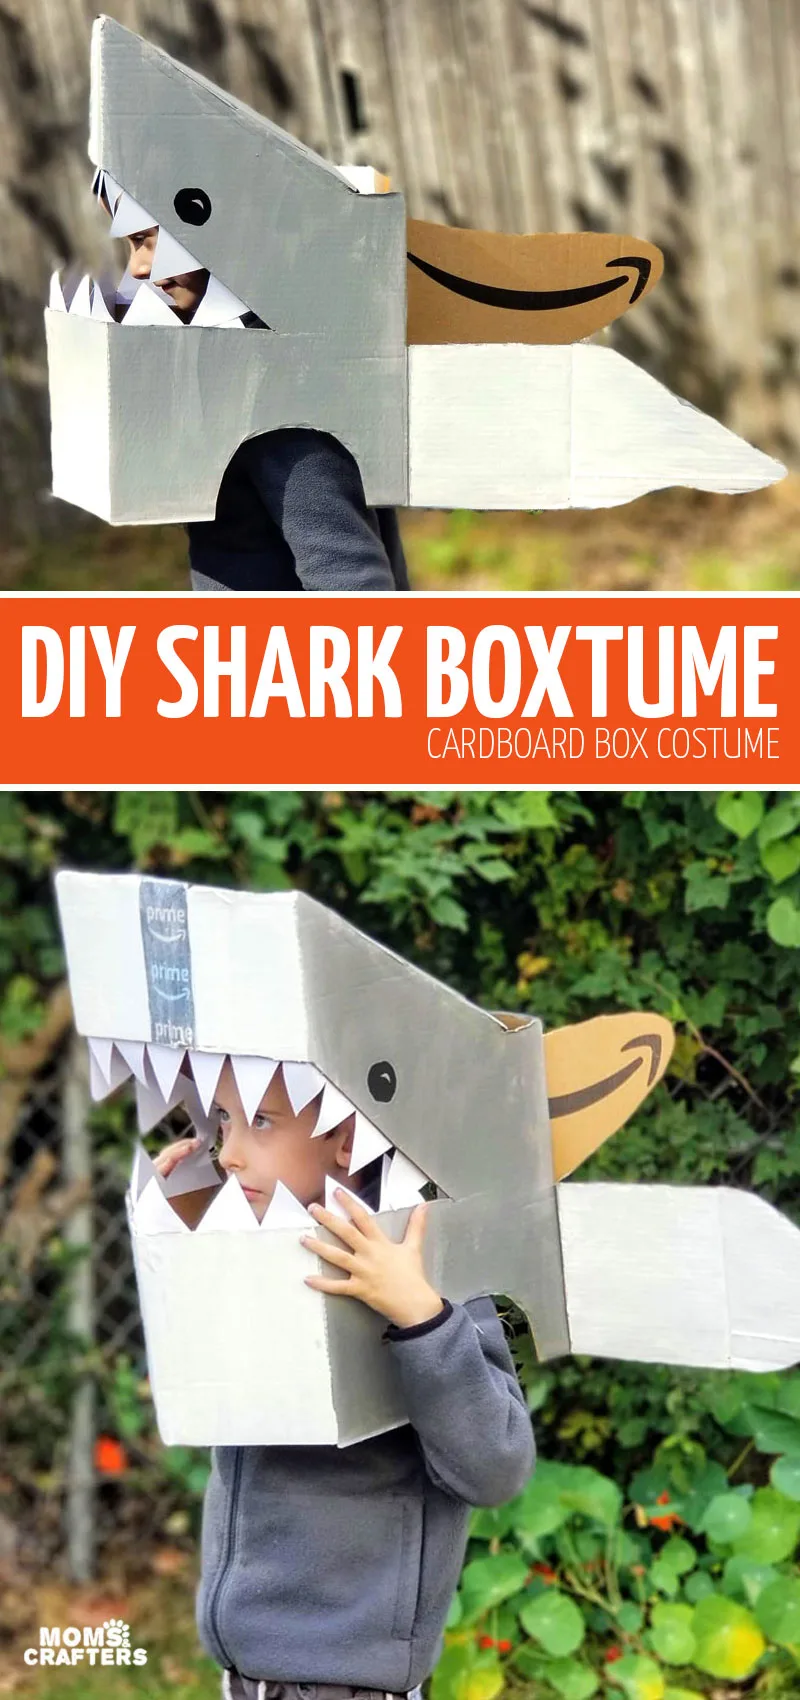 Craft an easy DIY Shark Costume - a great last minute Halloween costume idea using a cardboard box. Call it a Boxtume! This upcycled inexpensive costume is so easy to make.